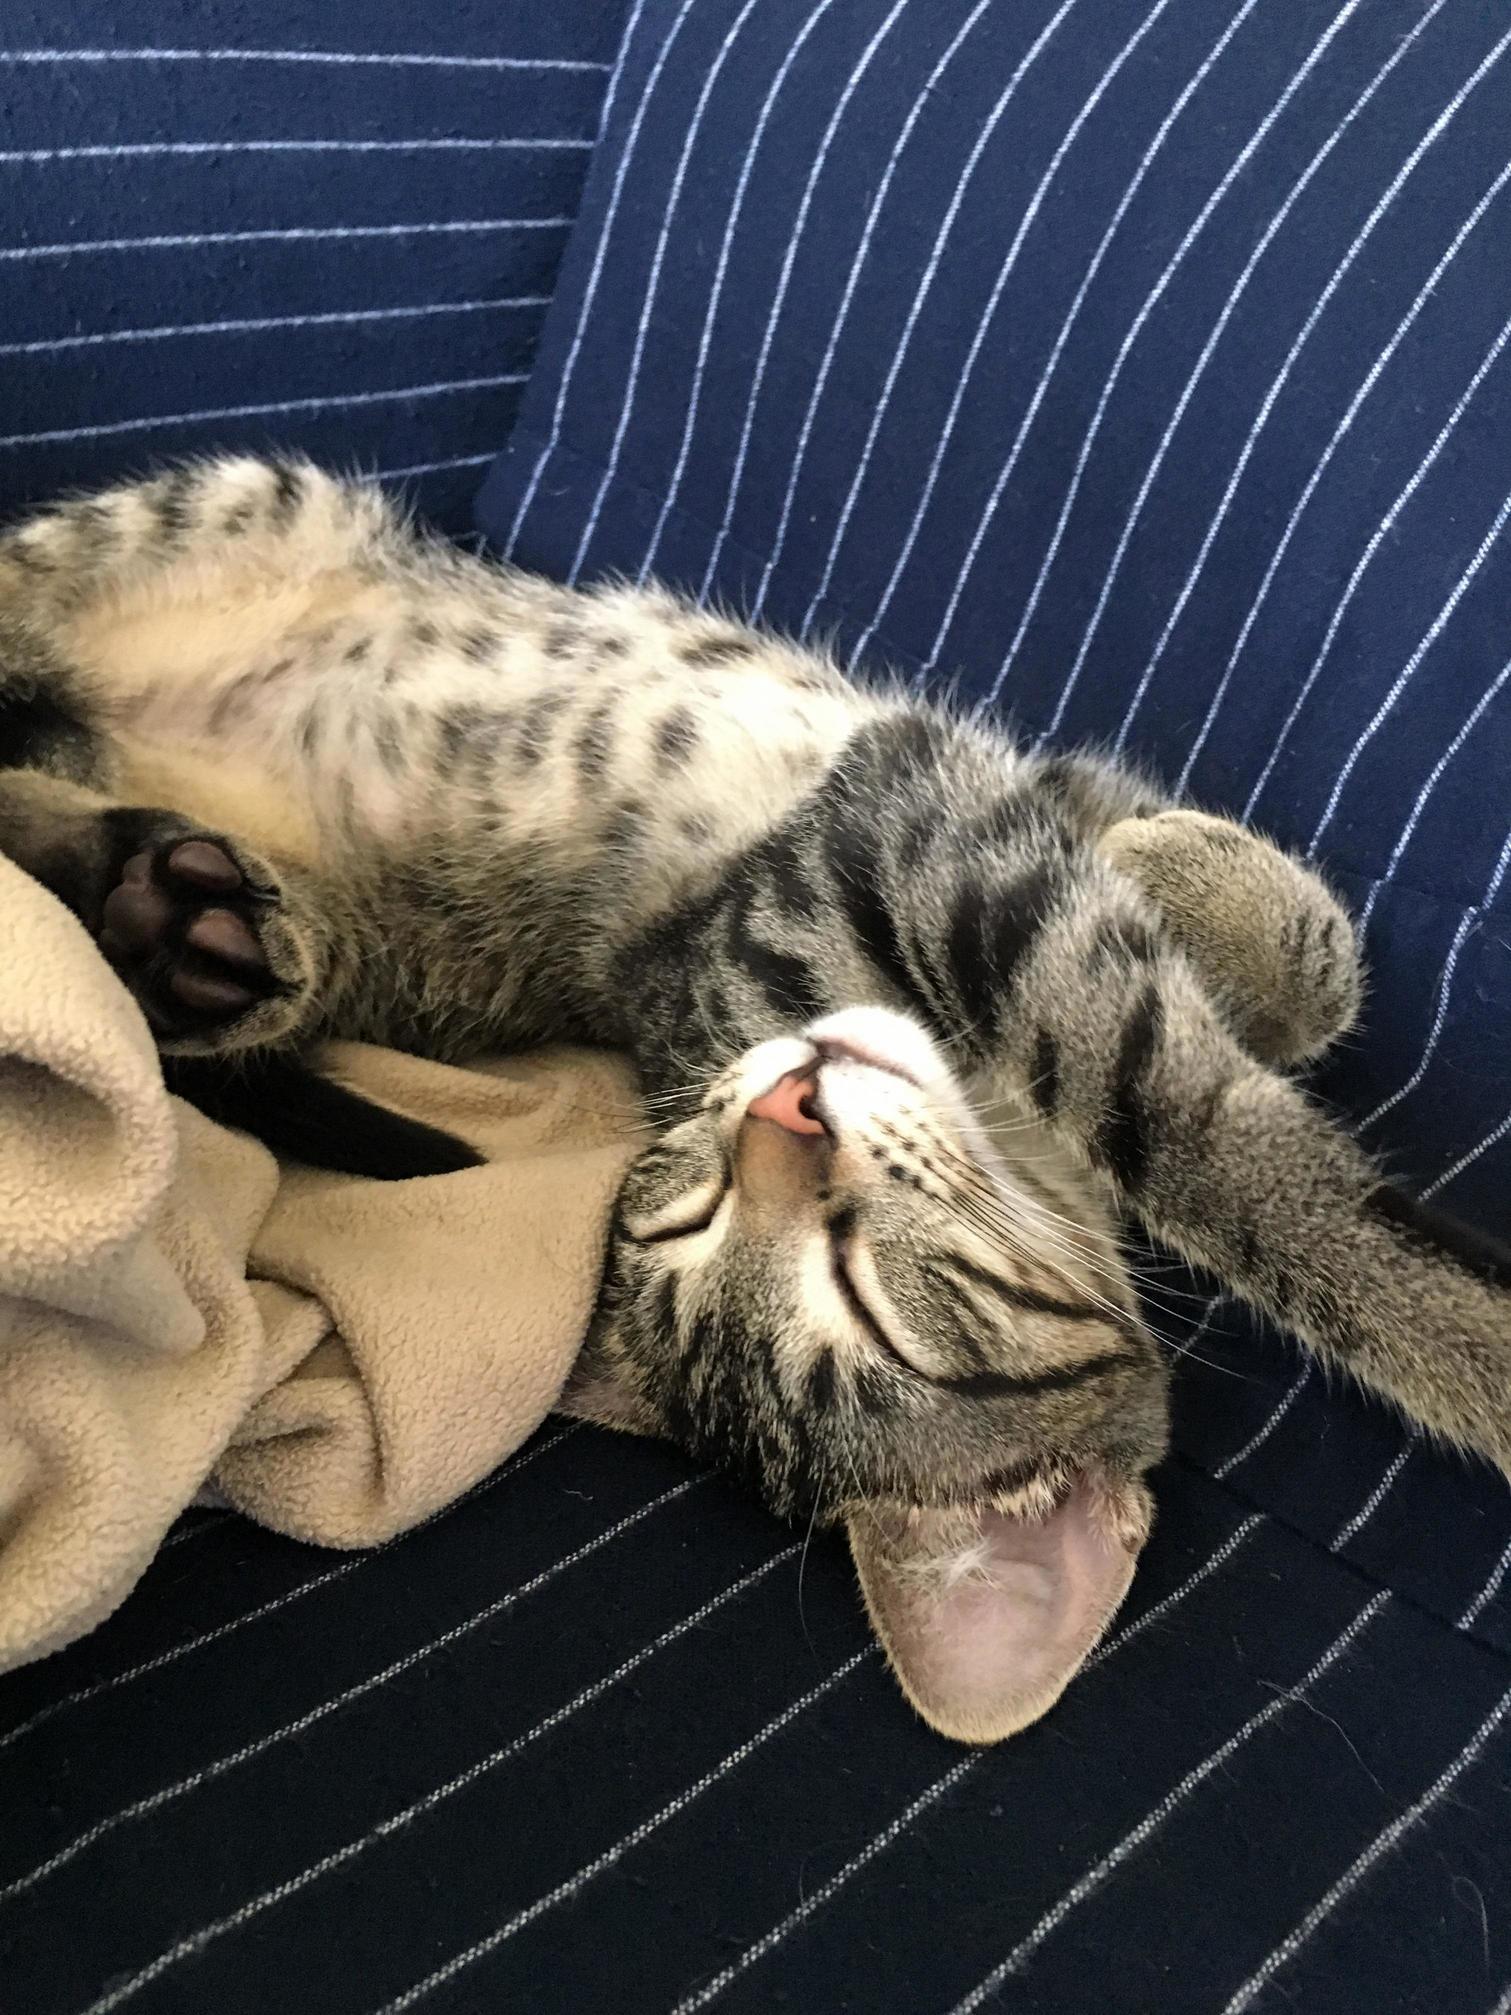 He loves sleeping on his back